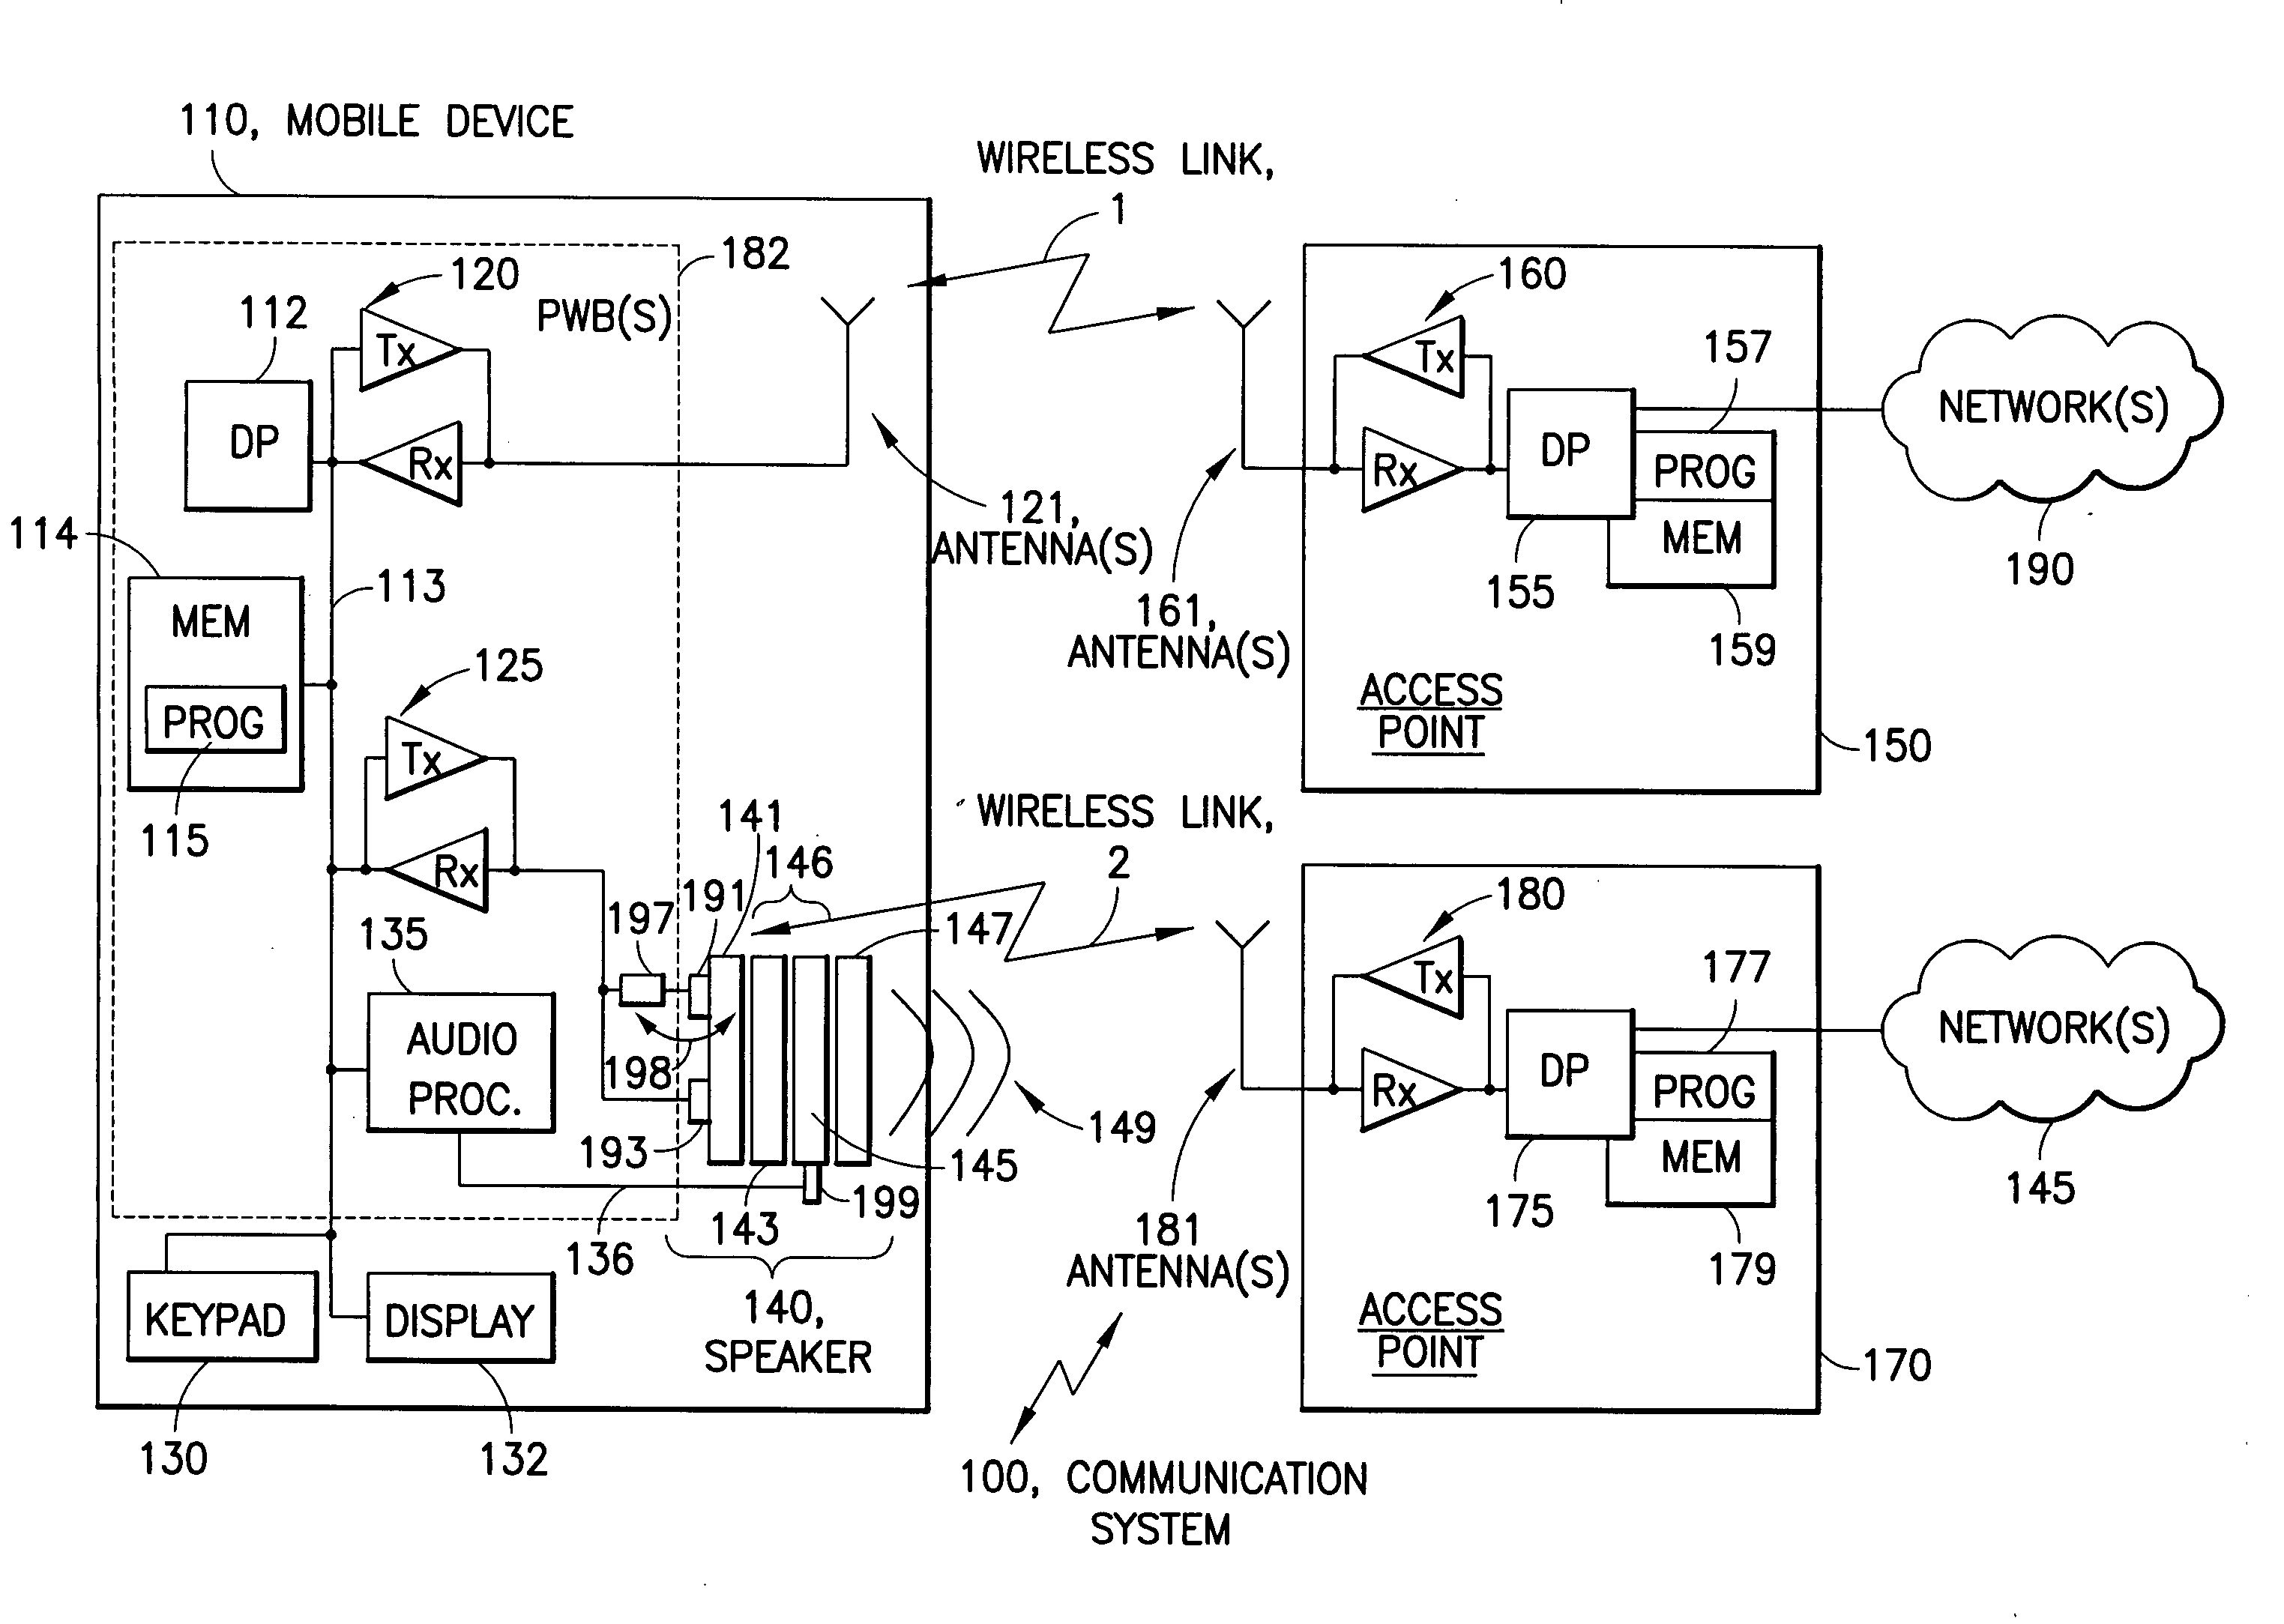 Using a conductive support of a speaker assembly as an antenna